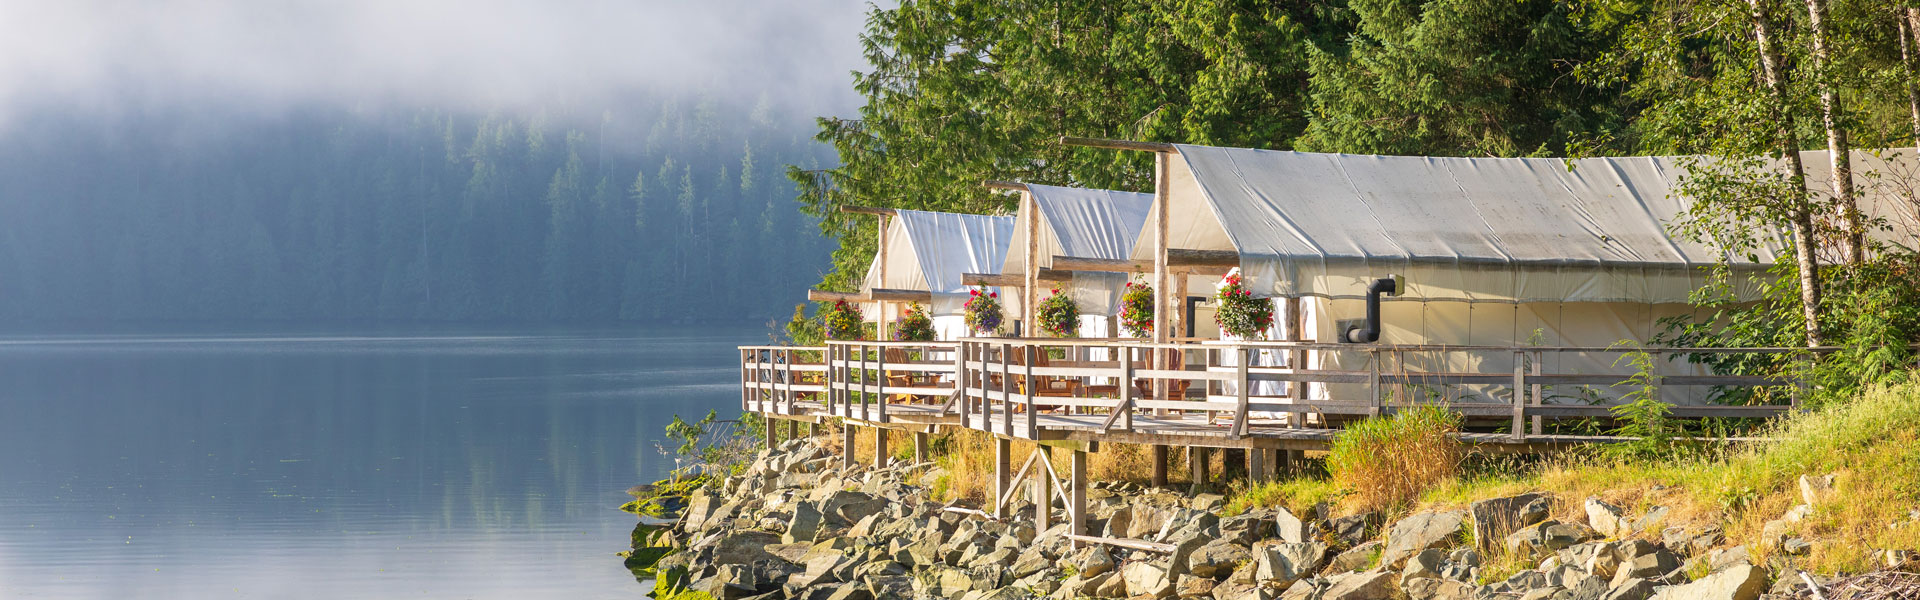 West Coast Canada Rail Trips with Luxury Lodges & Hotels